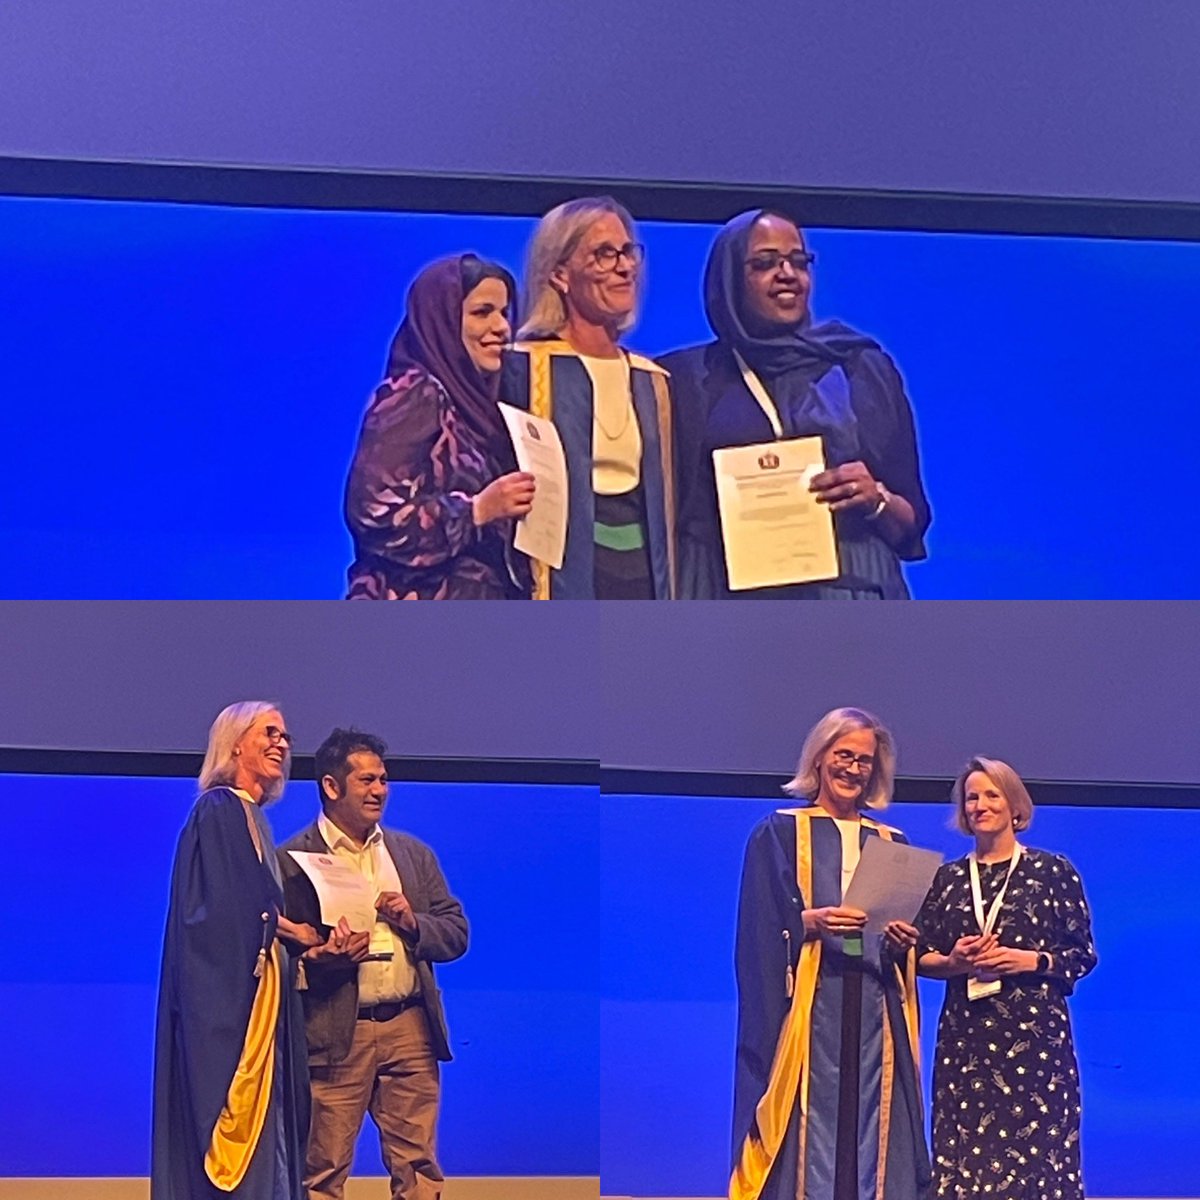 Mega congratulations to winners of our Members Awards - Professor Ian Sinha  - Dr Elizabeth Whittaker - Team Soft Landing - Dr Nadia Baasher and Dr Habab Easa Who have all undertaken exceptional work in support of child health. Thank you to you all! #RCPCH23